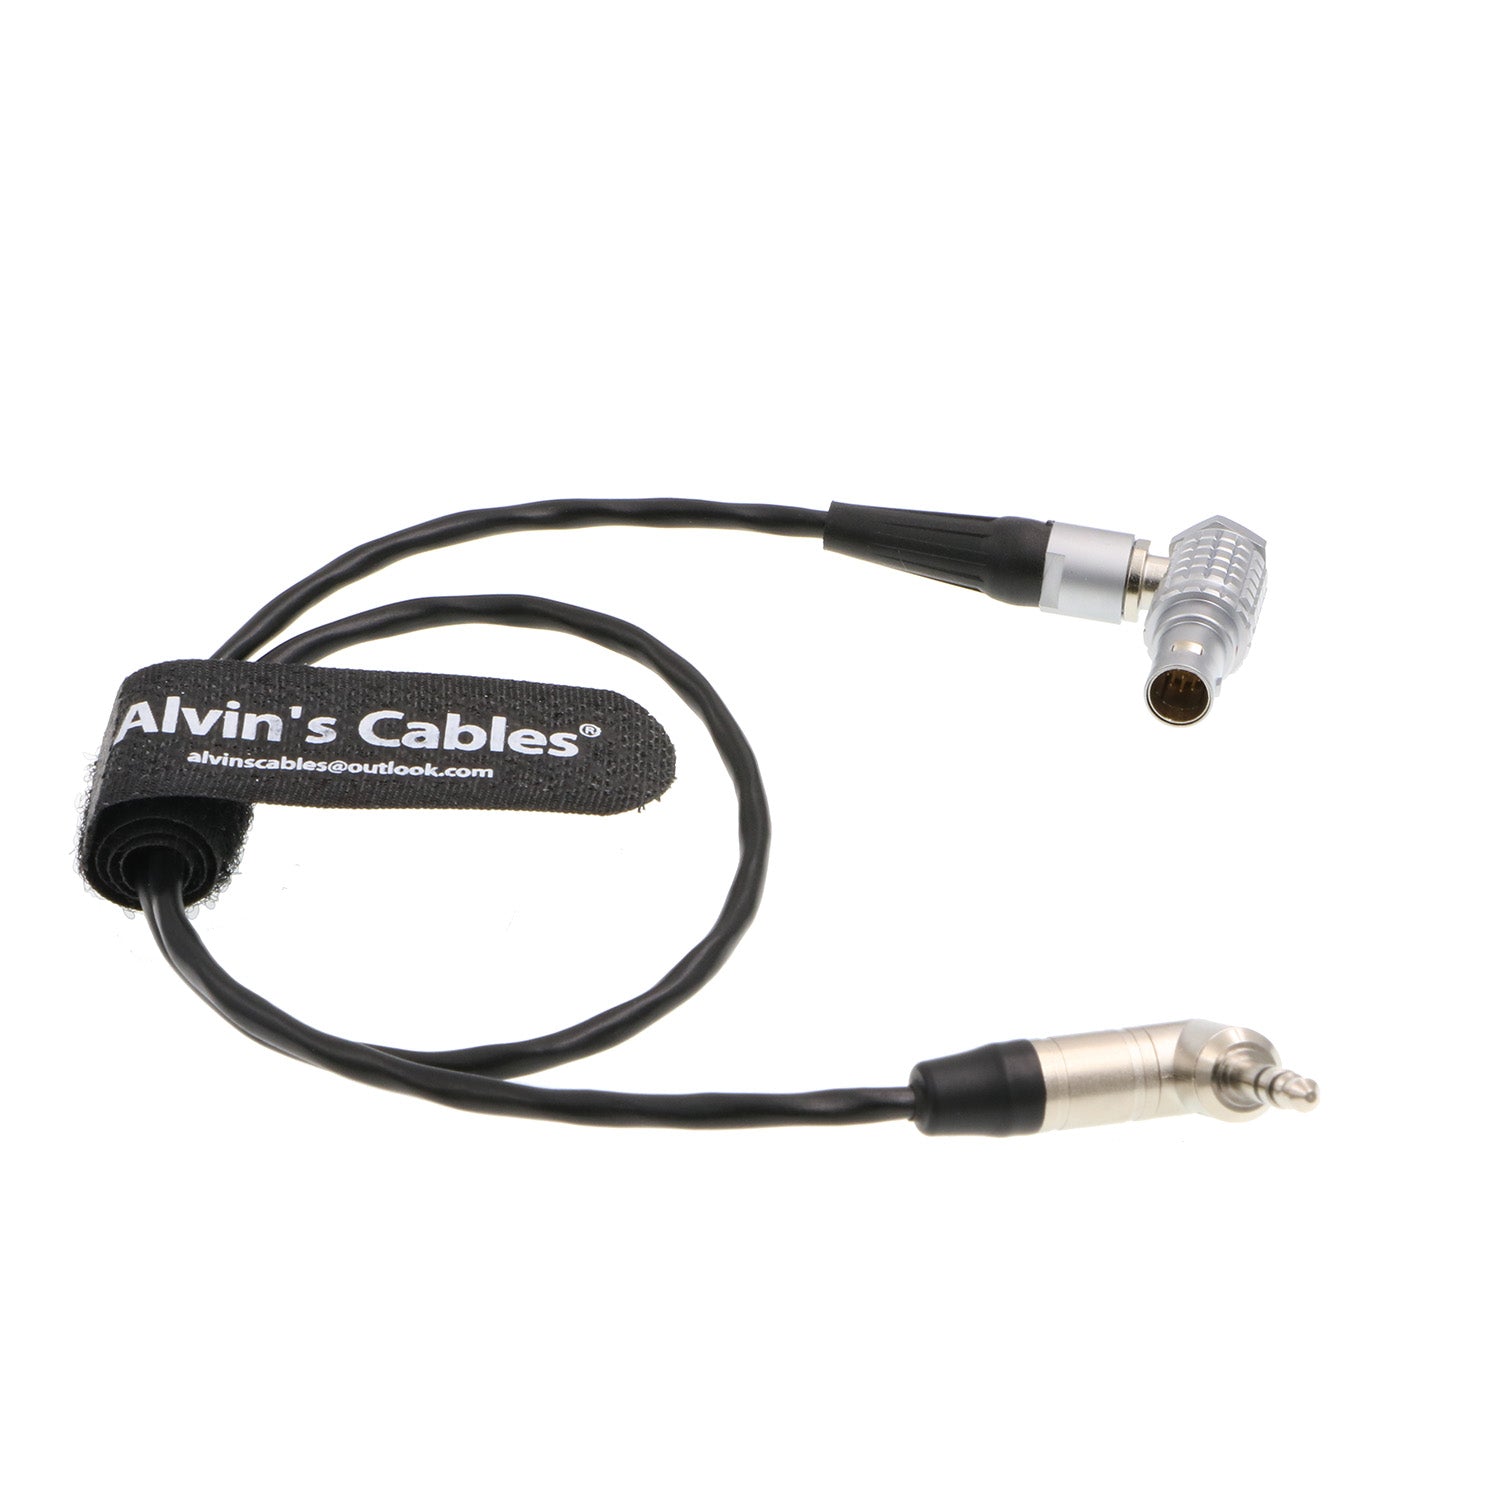 Alvin's Cables Red Komodo Timecode Cable Tentacle Sync 3.5mm TRS to EXT 9 Pin Male